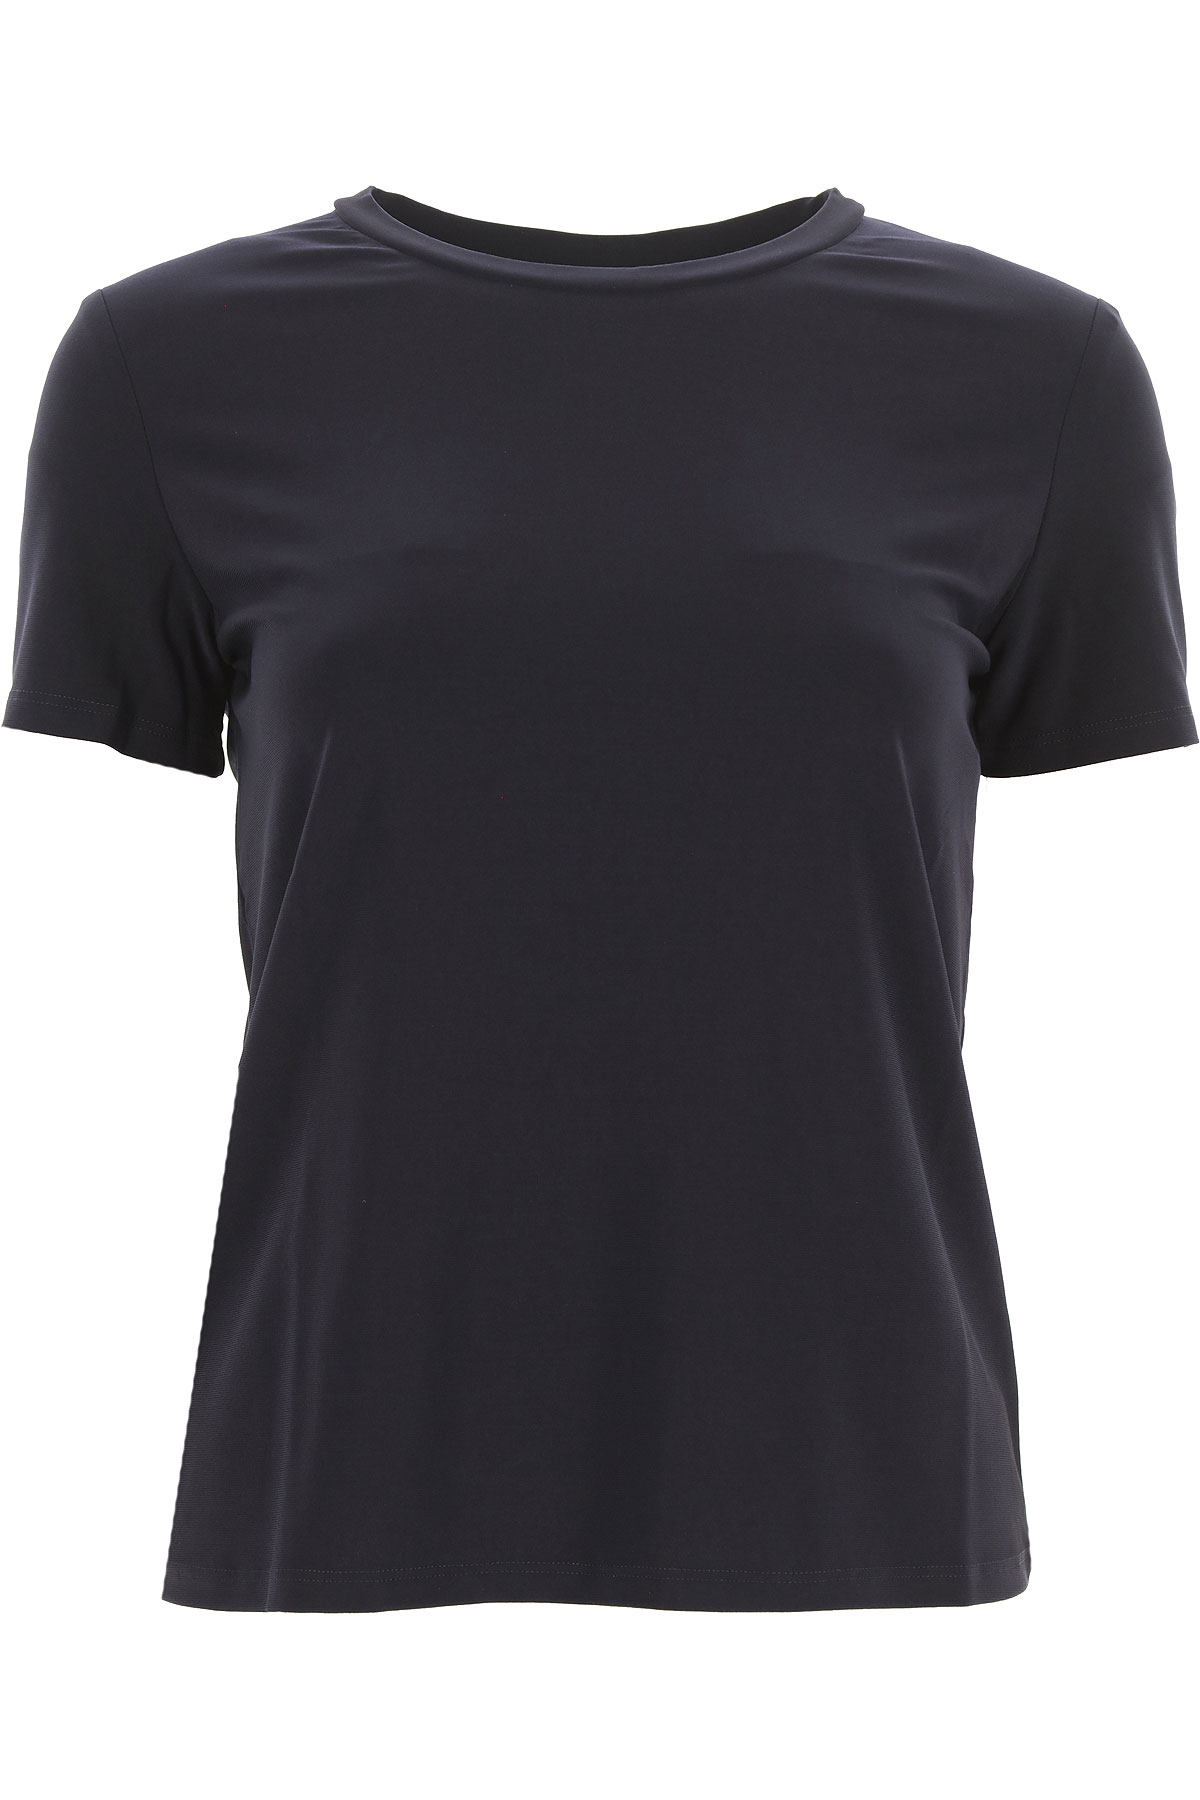 Max MaraMax Mara T-Shirt for Women On Sale, navy, polyestere, 2019, 10 ...